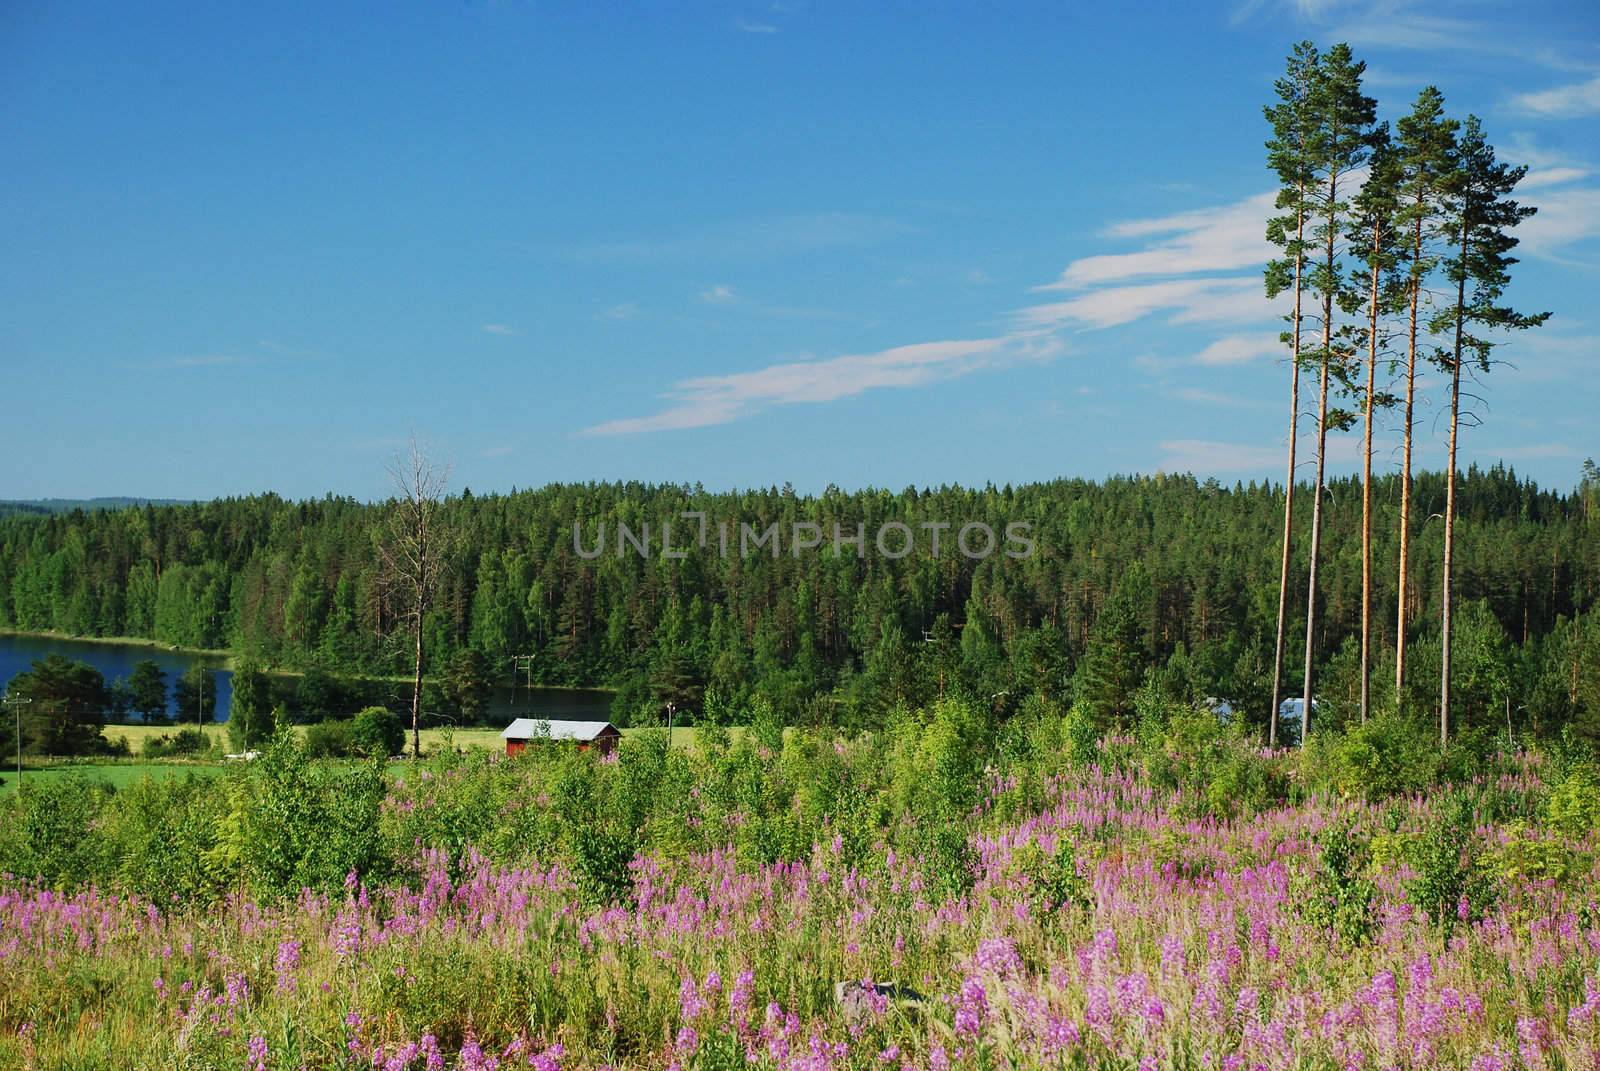 Its the meadows of Wild lupins and many different flowers, surrounded with  birch and coniferous forests approaching the lake Small farmers houses are hiden in the nature of Hankasalmi municipality in Central Finland 